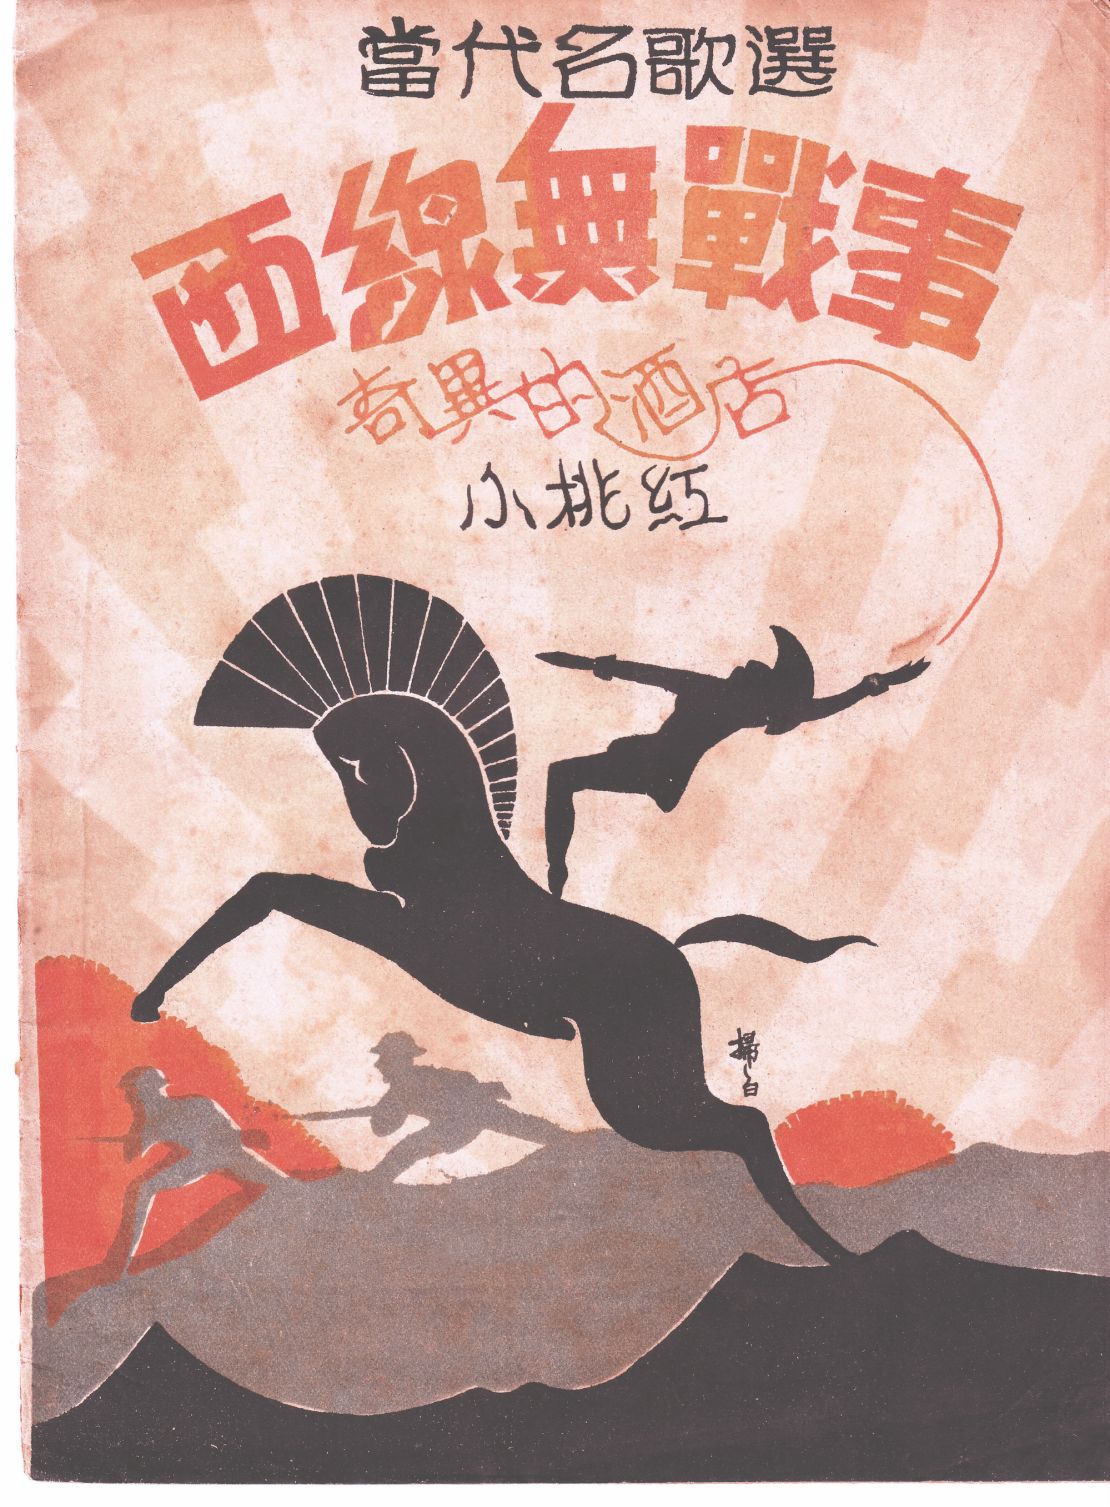 Unlike their Hollywood counterparts, many Chinese movie publications of the 1920s and '30s used graphics or drawings on their covers, not photos.